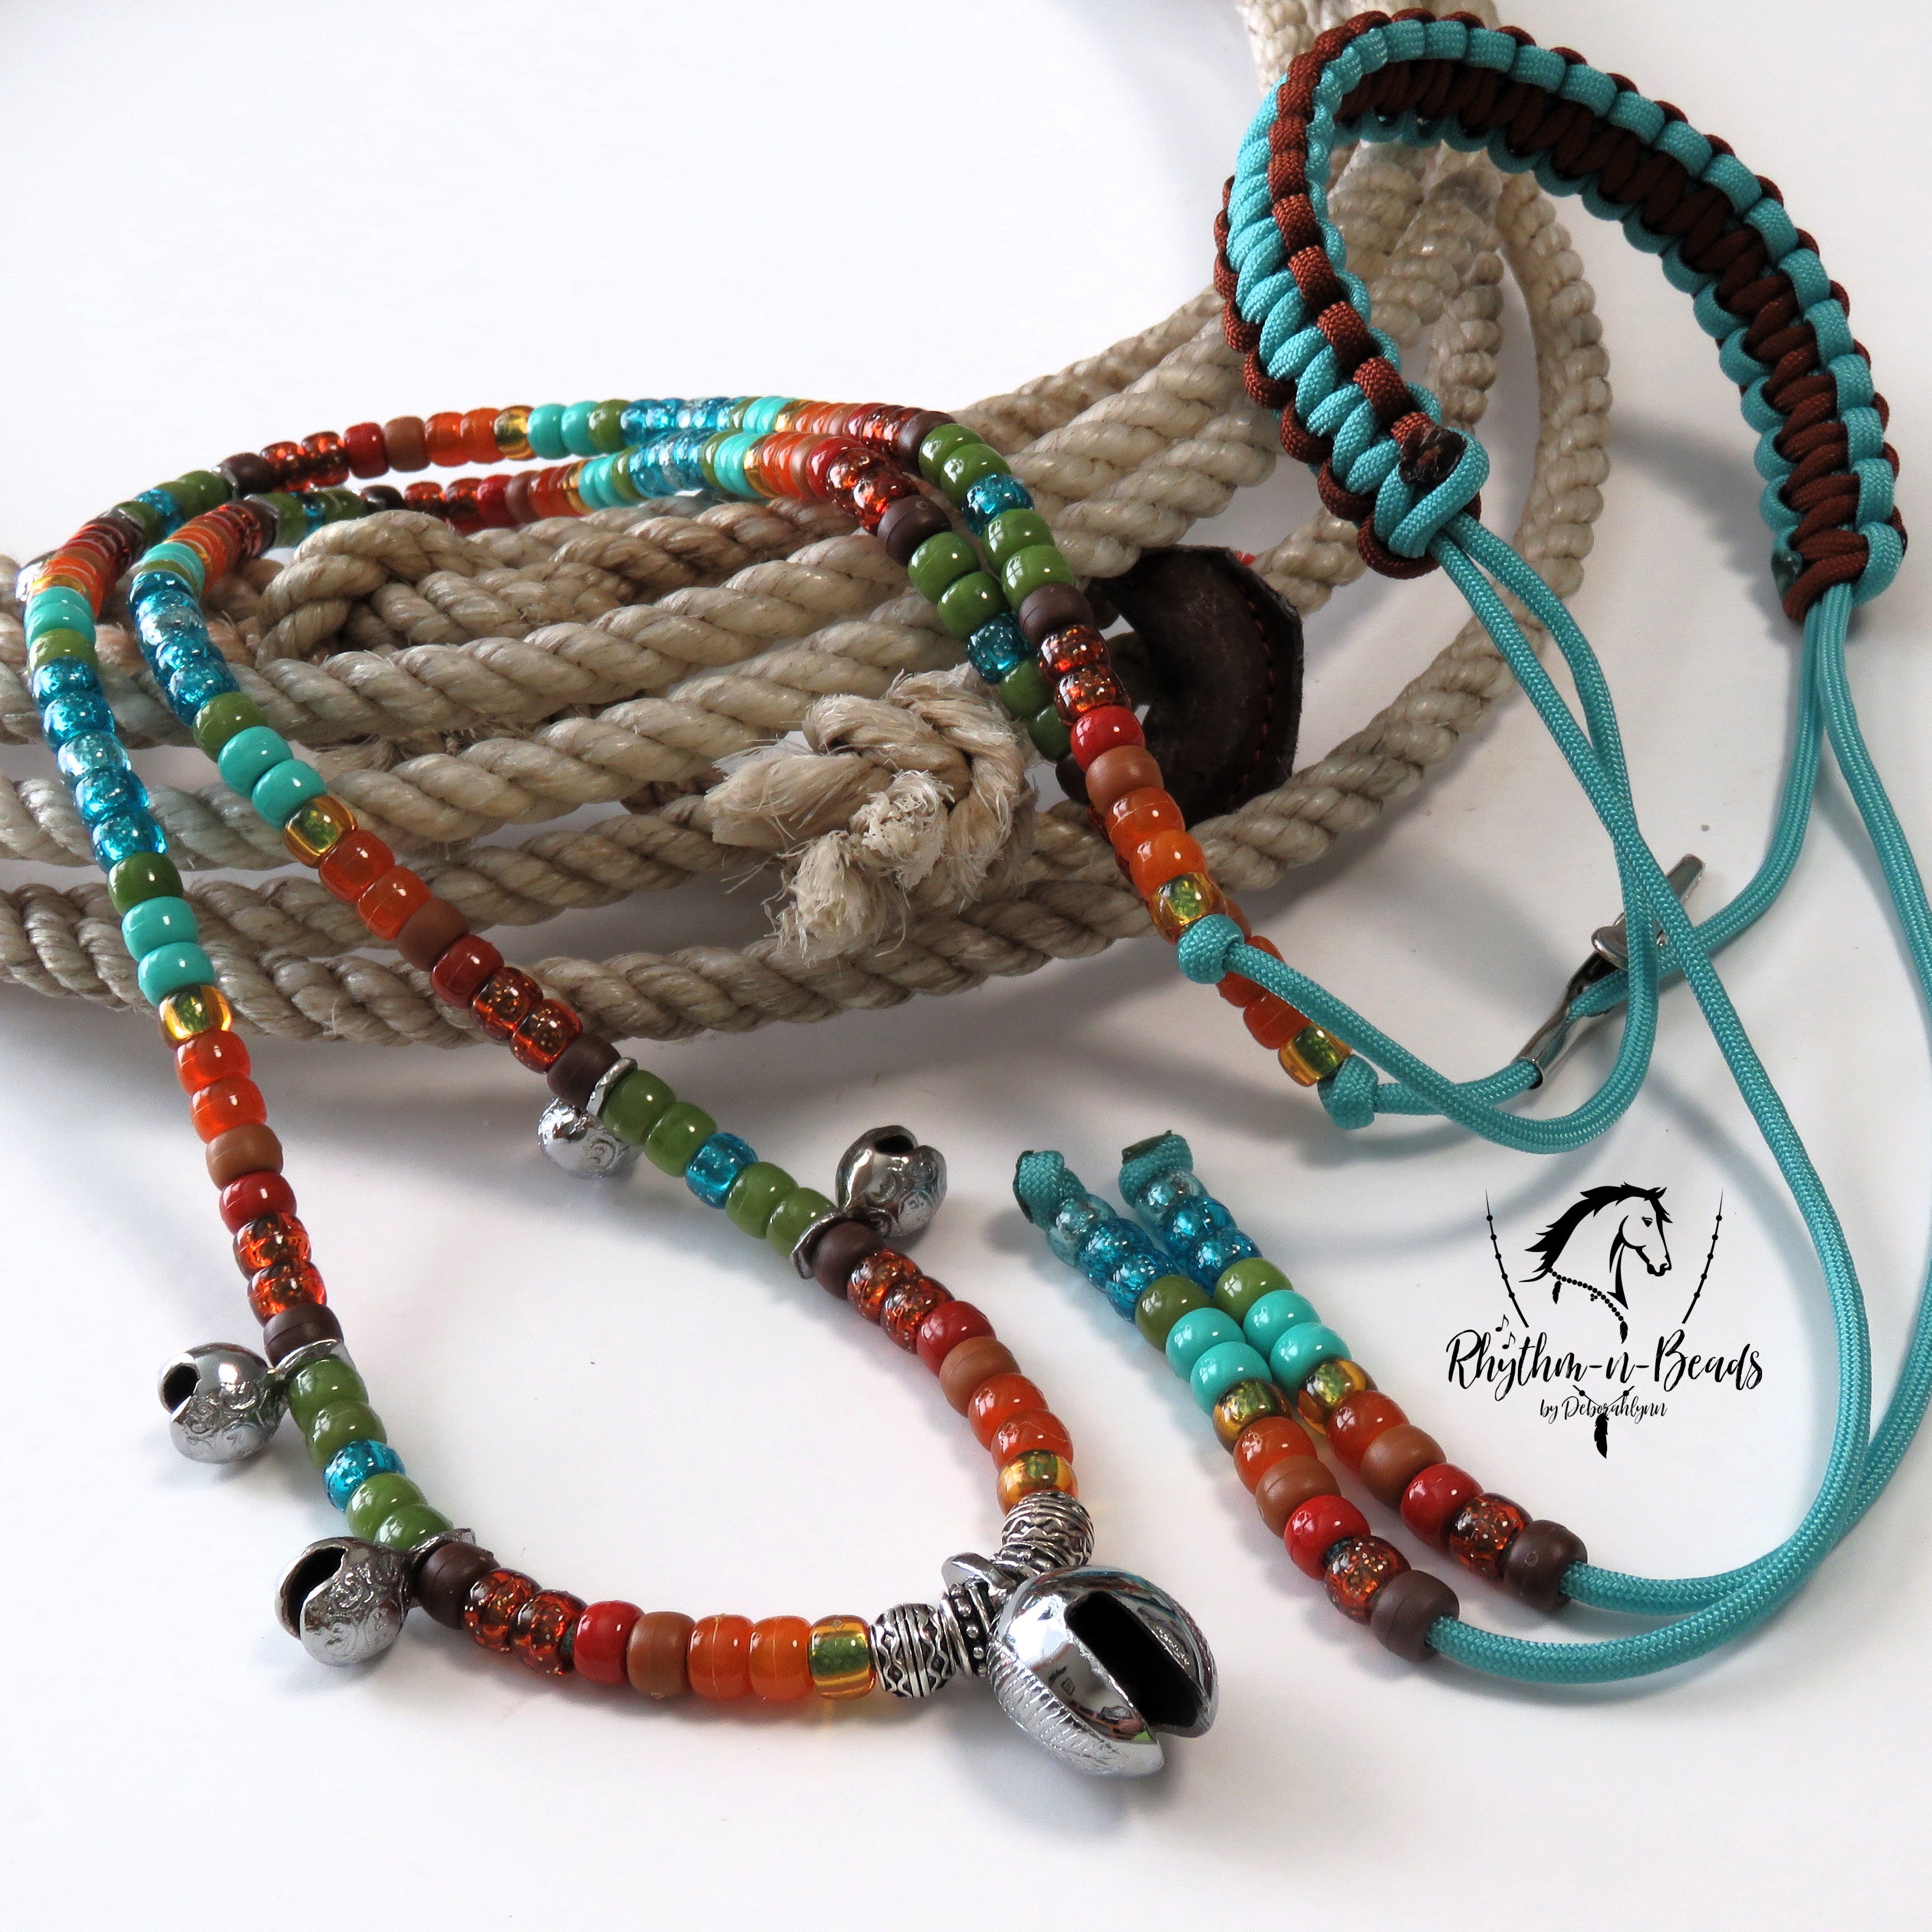 2 in 1 Cadence Cordeo© Neck Rope-Rhythm Bead Necklace - EARTH & SKY